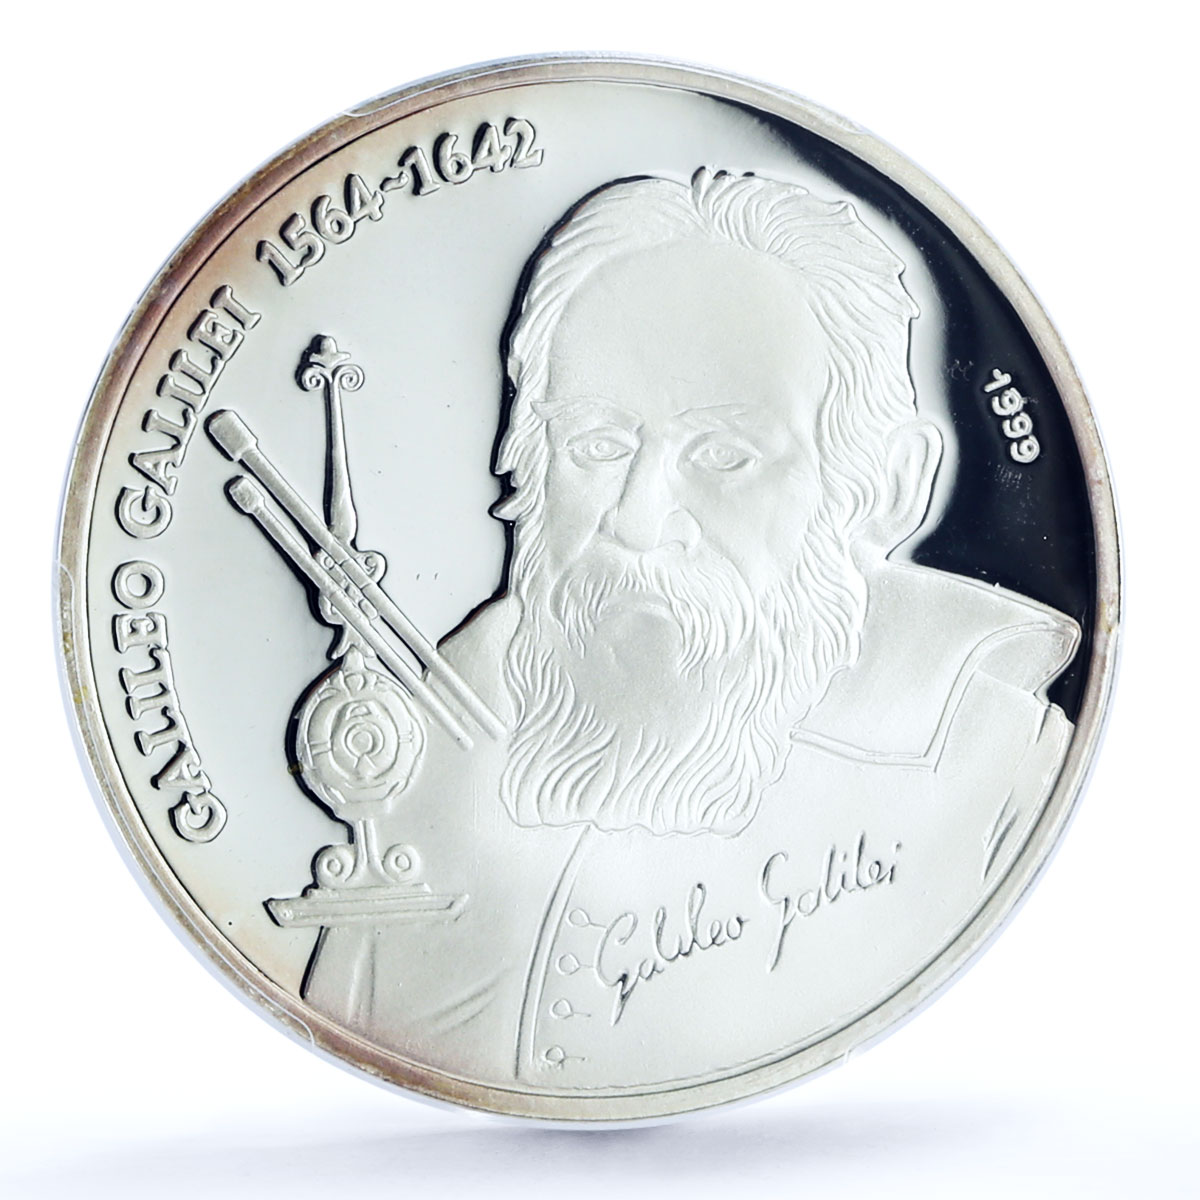 Chad 1000 francs Science Astronomer Galileo Galilei PR68 PCGS silver coin 1999